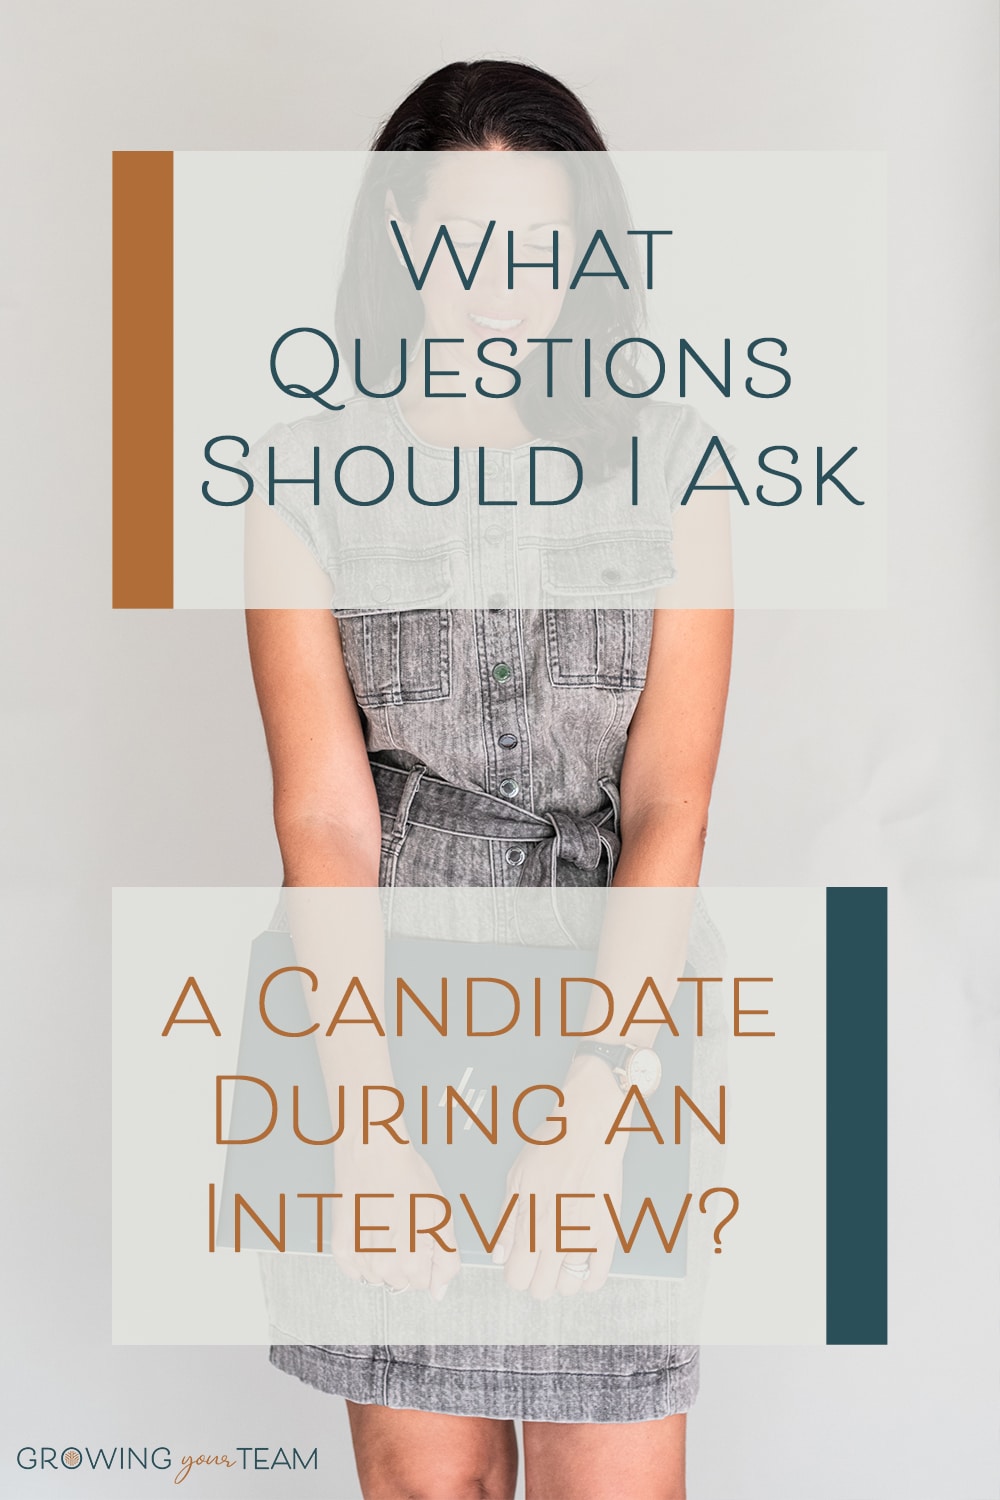 What Questions Should I Ask a Candidate During an Interview?, Growing Your Team, Jamie Van Cuyk, Small Business hiring consulting